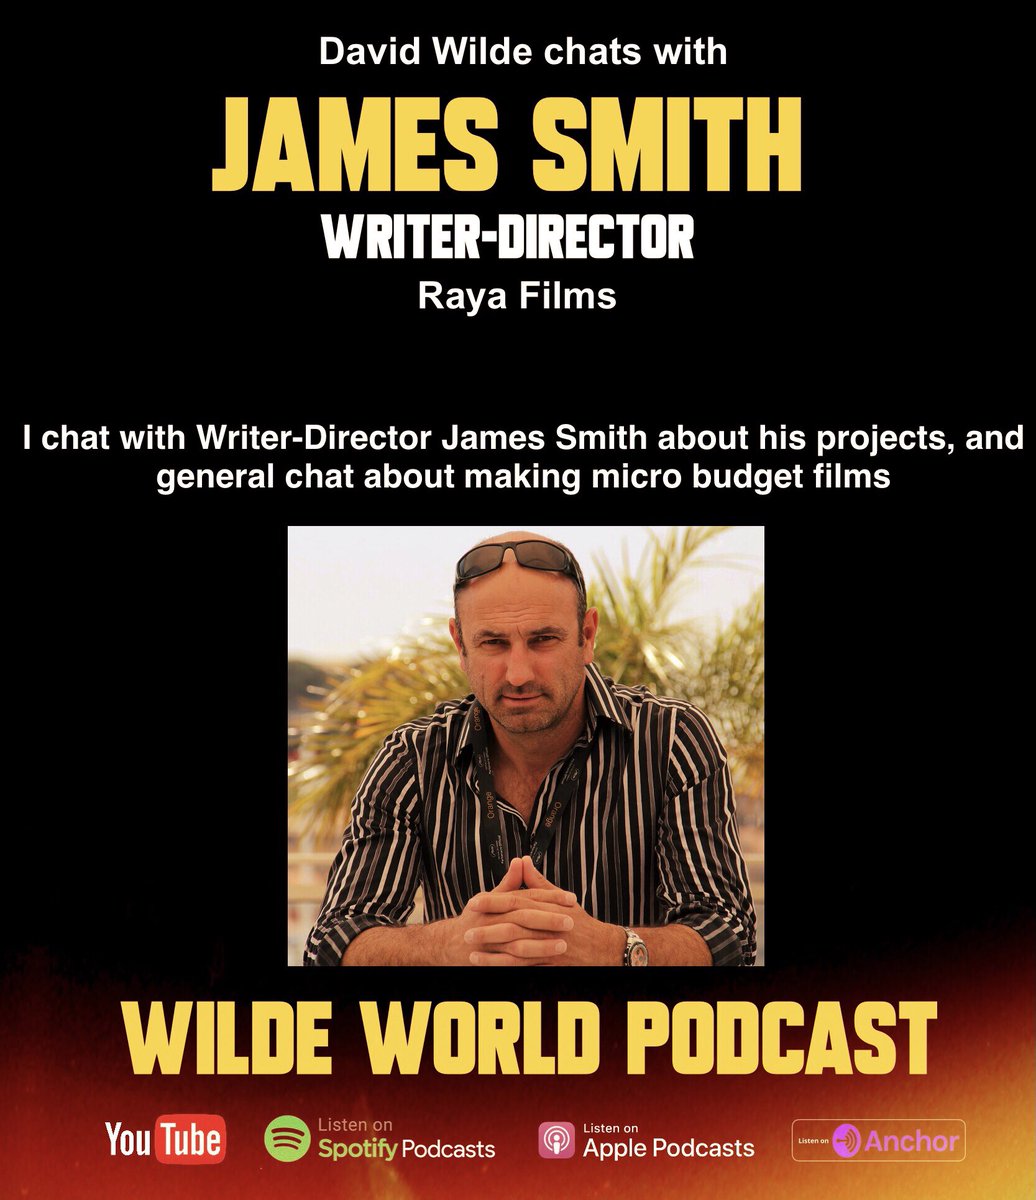 Many thanks to James Smith @jsmithwriter from @RayaFilms for being my guest today. Released tomorrow. 

#podcast #filmmaking #indiefilm #rayafilmslondon #BestGeezerMovie